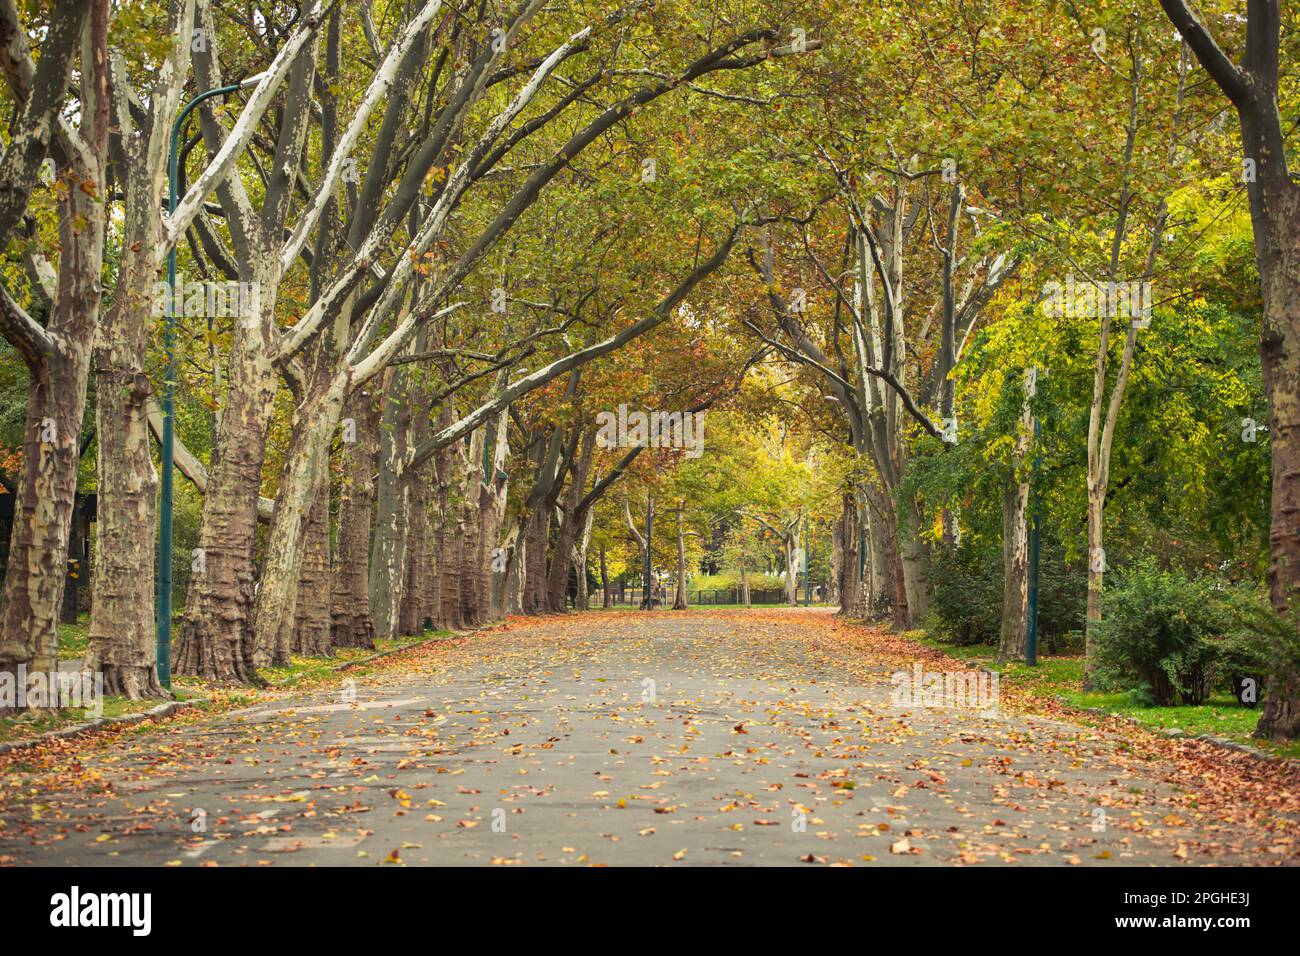 Beautiful romantic alley in a park with colorful trees and sunlight. Autumn natural background Stock Photo